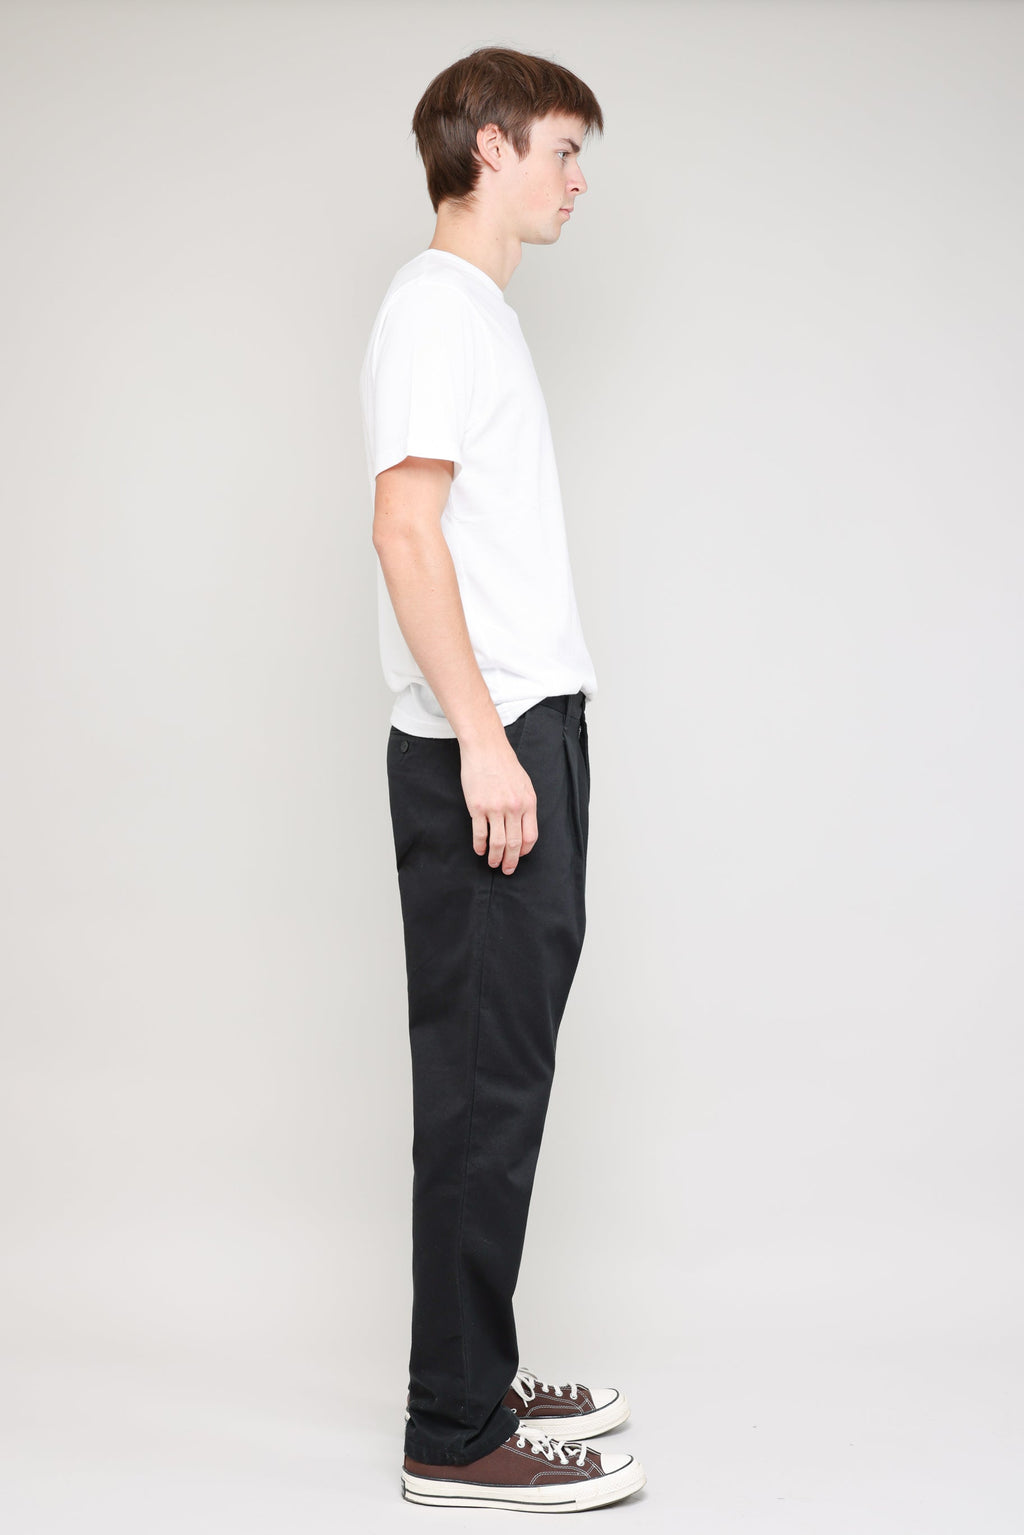 Pleated Chino Texture Cloth in Black 04